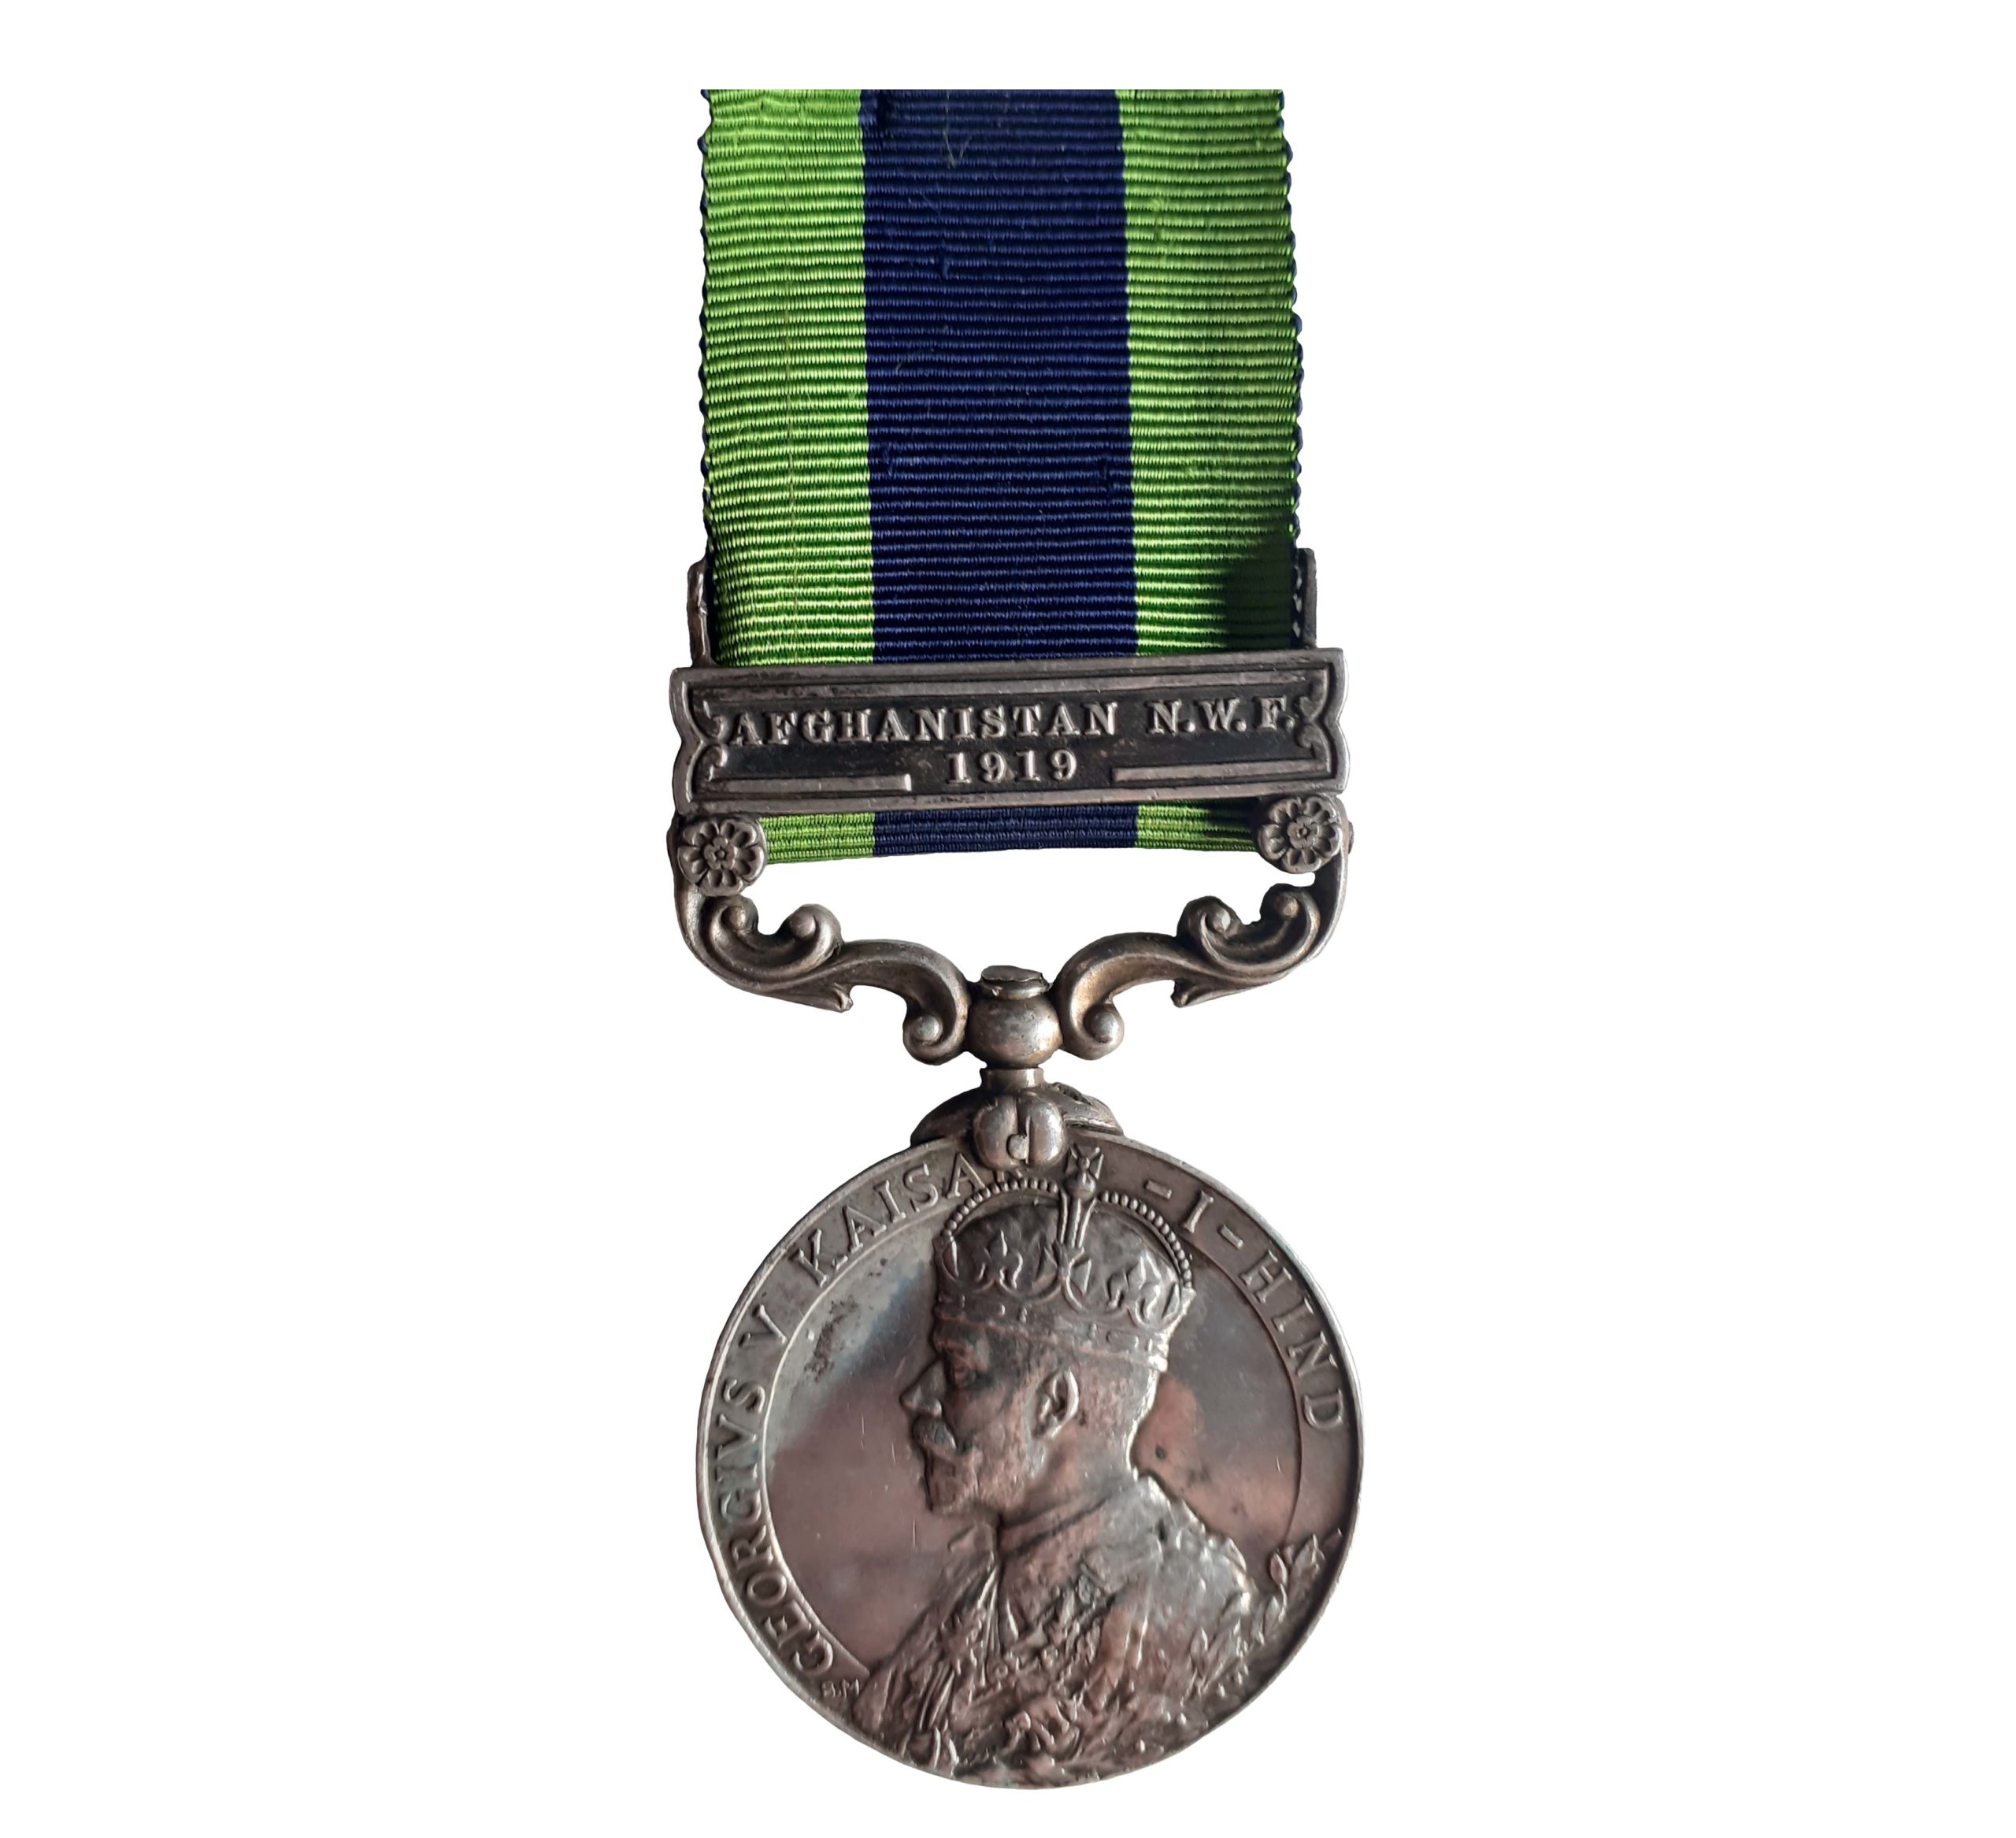 India General Service Medal 1908-35, one clasp, Afghanistan N.W.F. 1919 to Segeant J. M. Pike